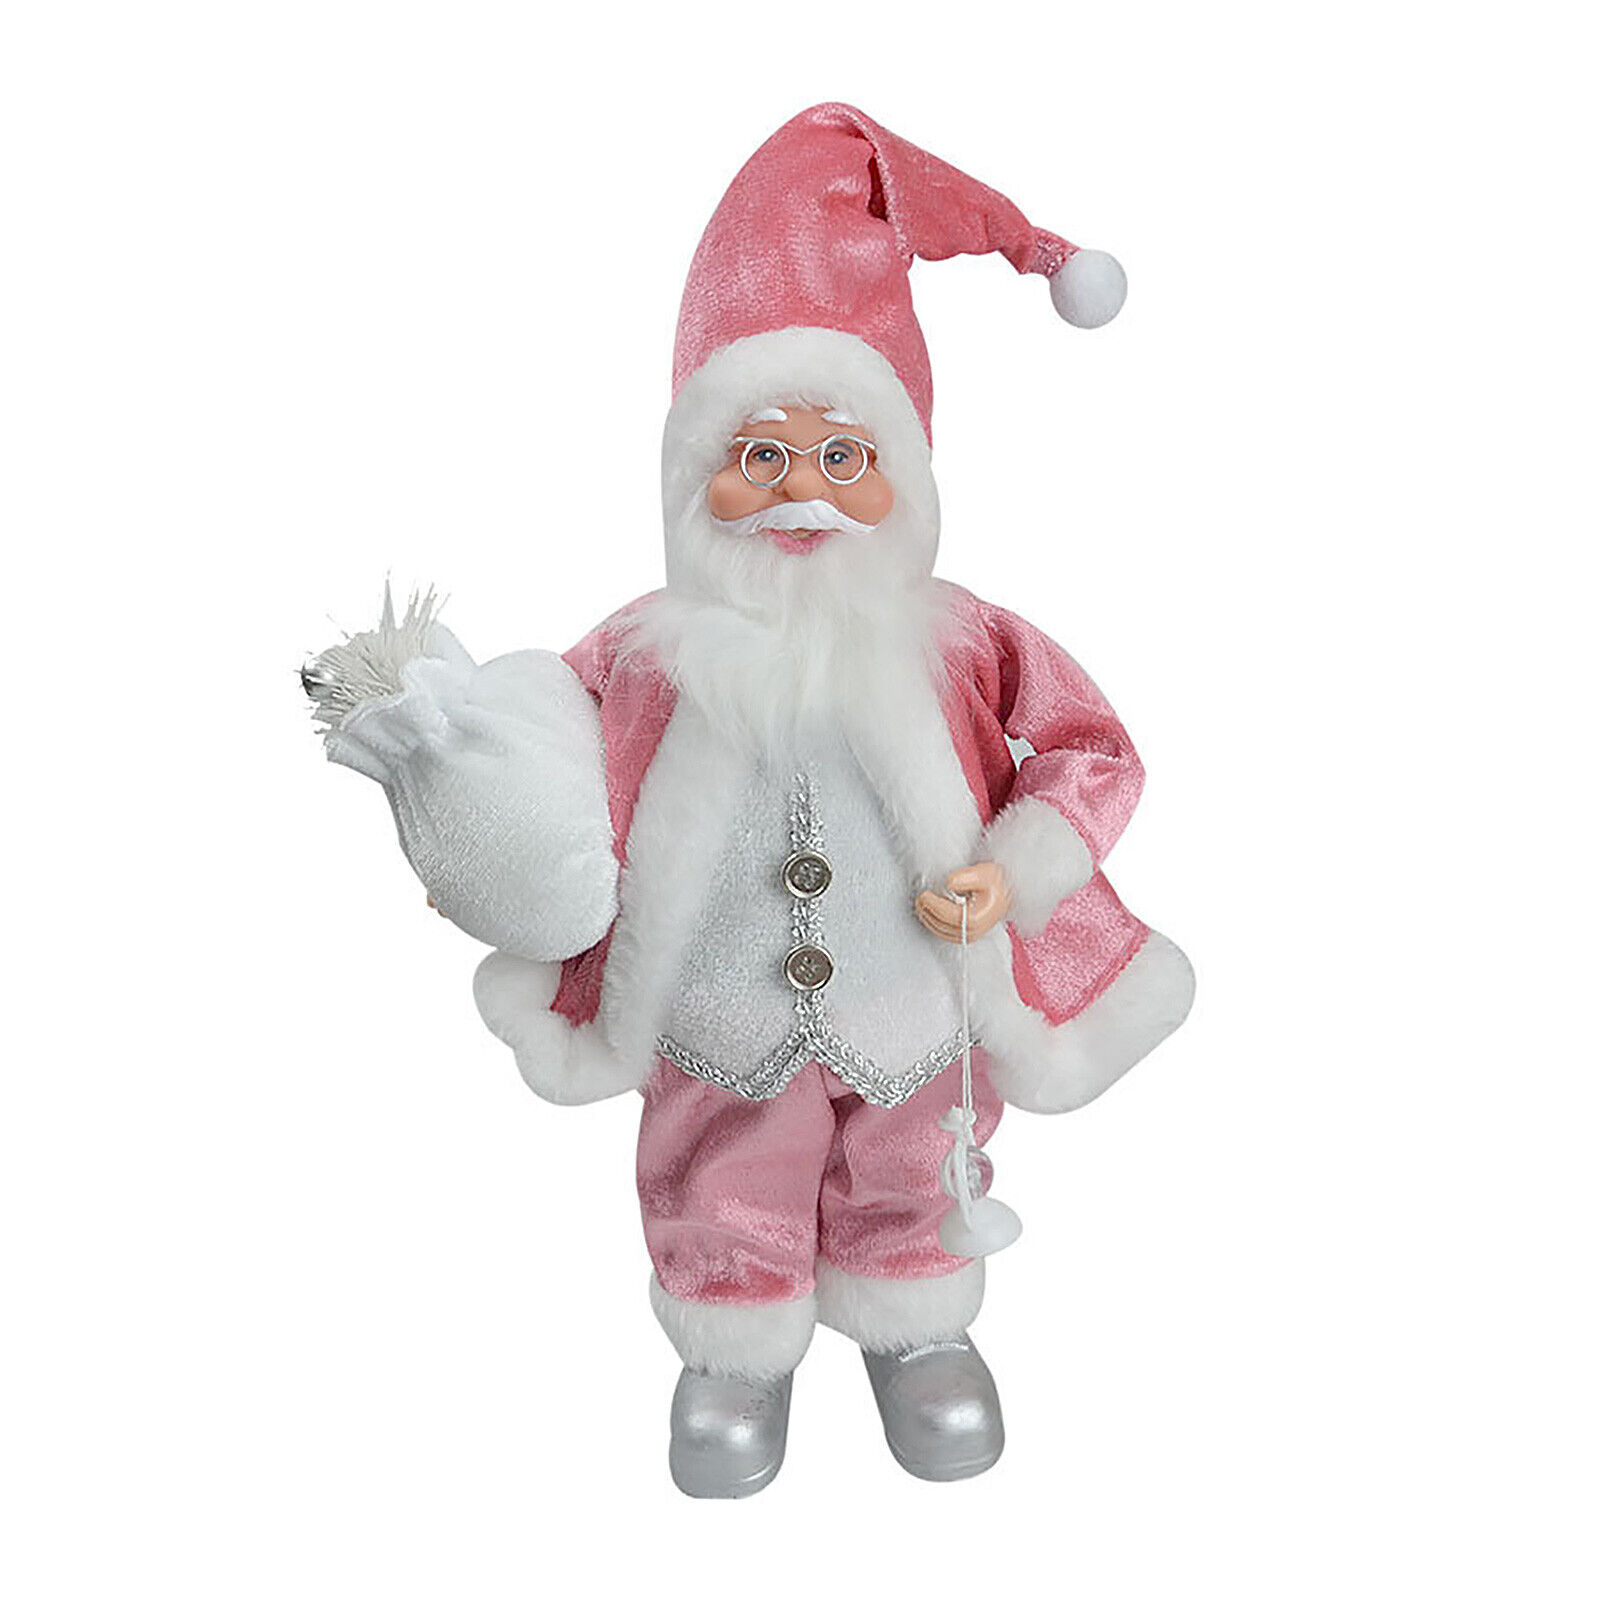 Children's Gifts For Home Christmas Atmosphere. Pink/White Santa Claus Statues